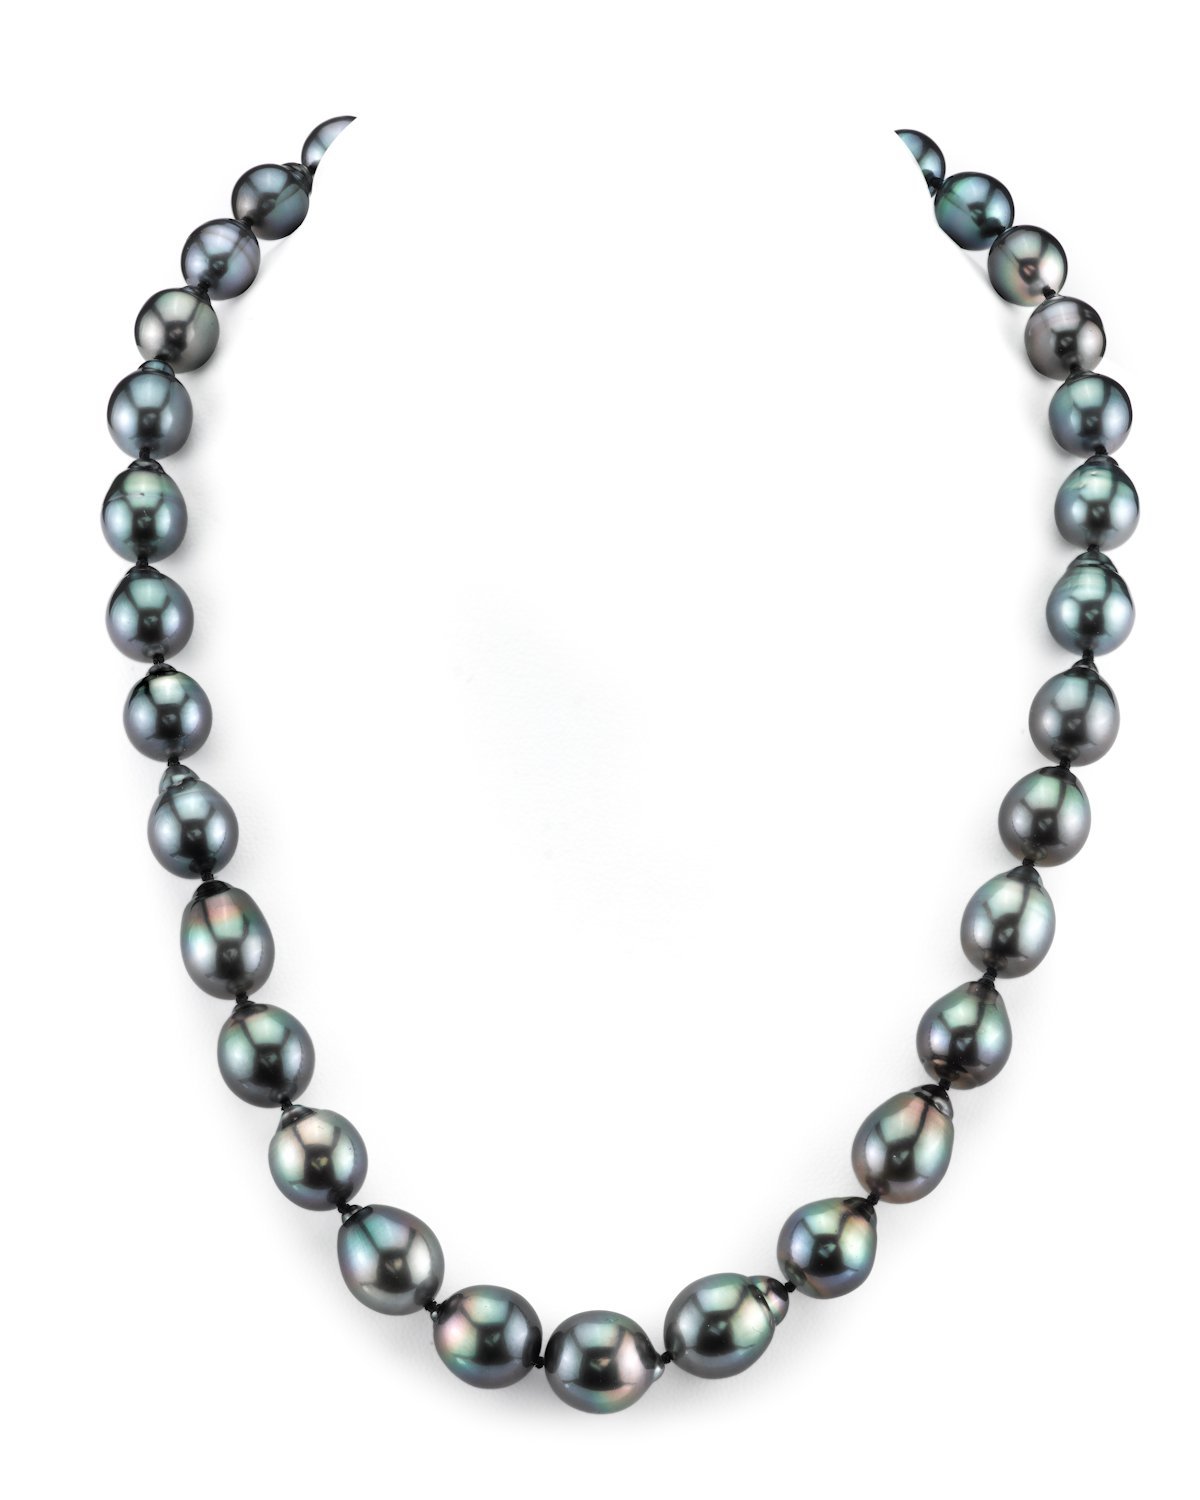 Black Pearl Necklace with Beads for Women - Talisa